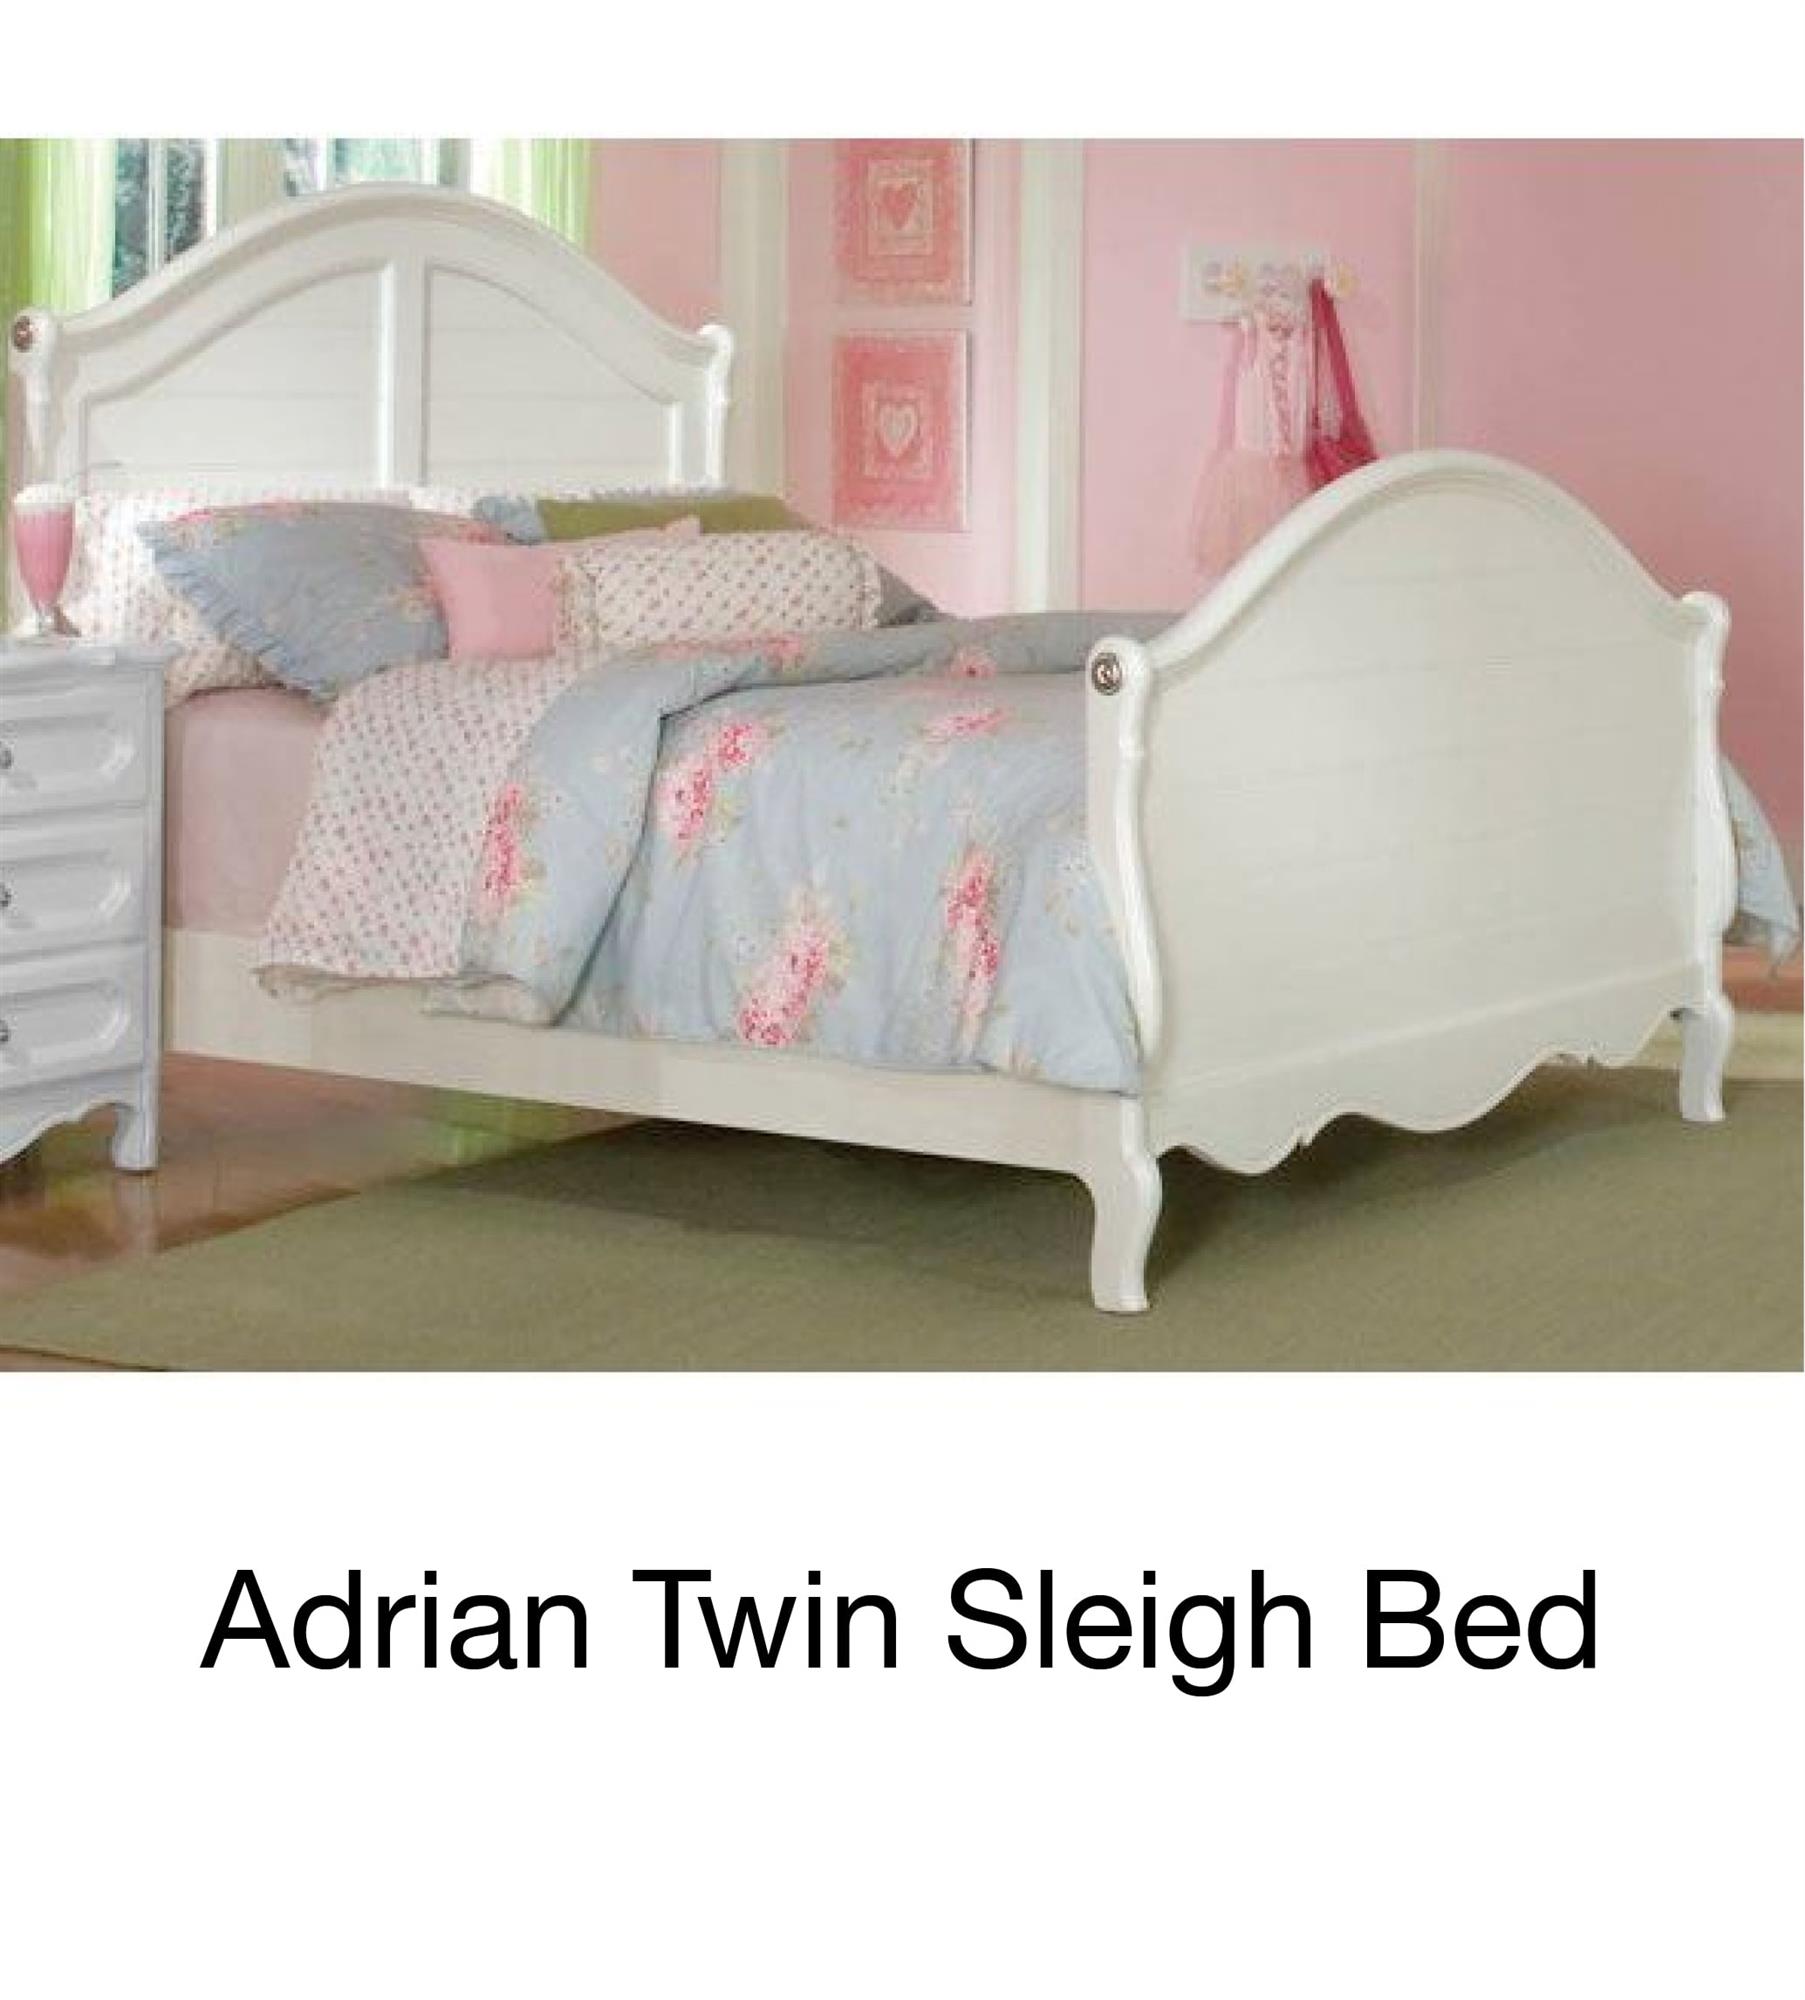 Adrian Twin Sleigh Bed